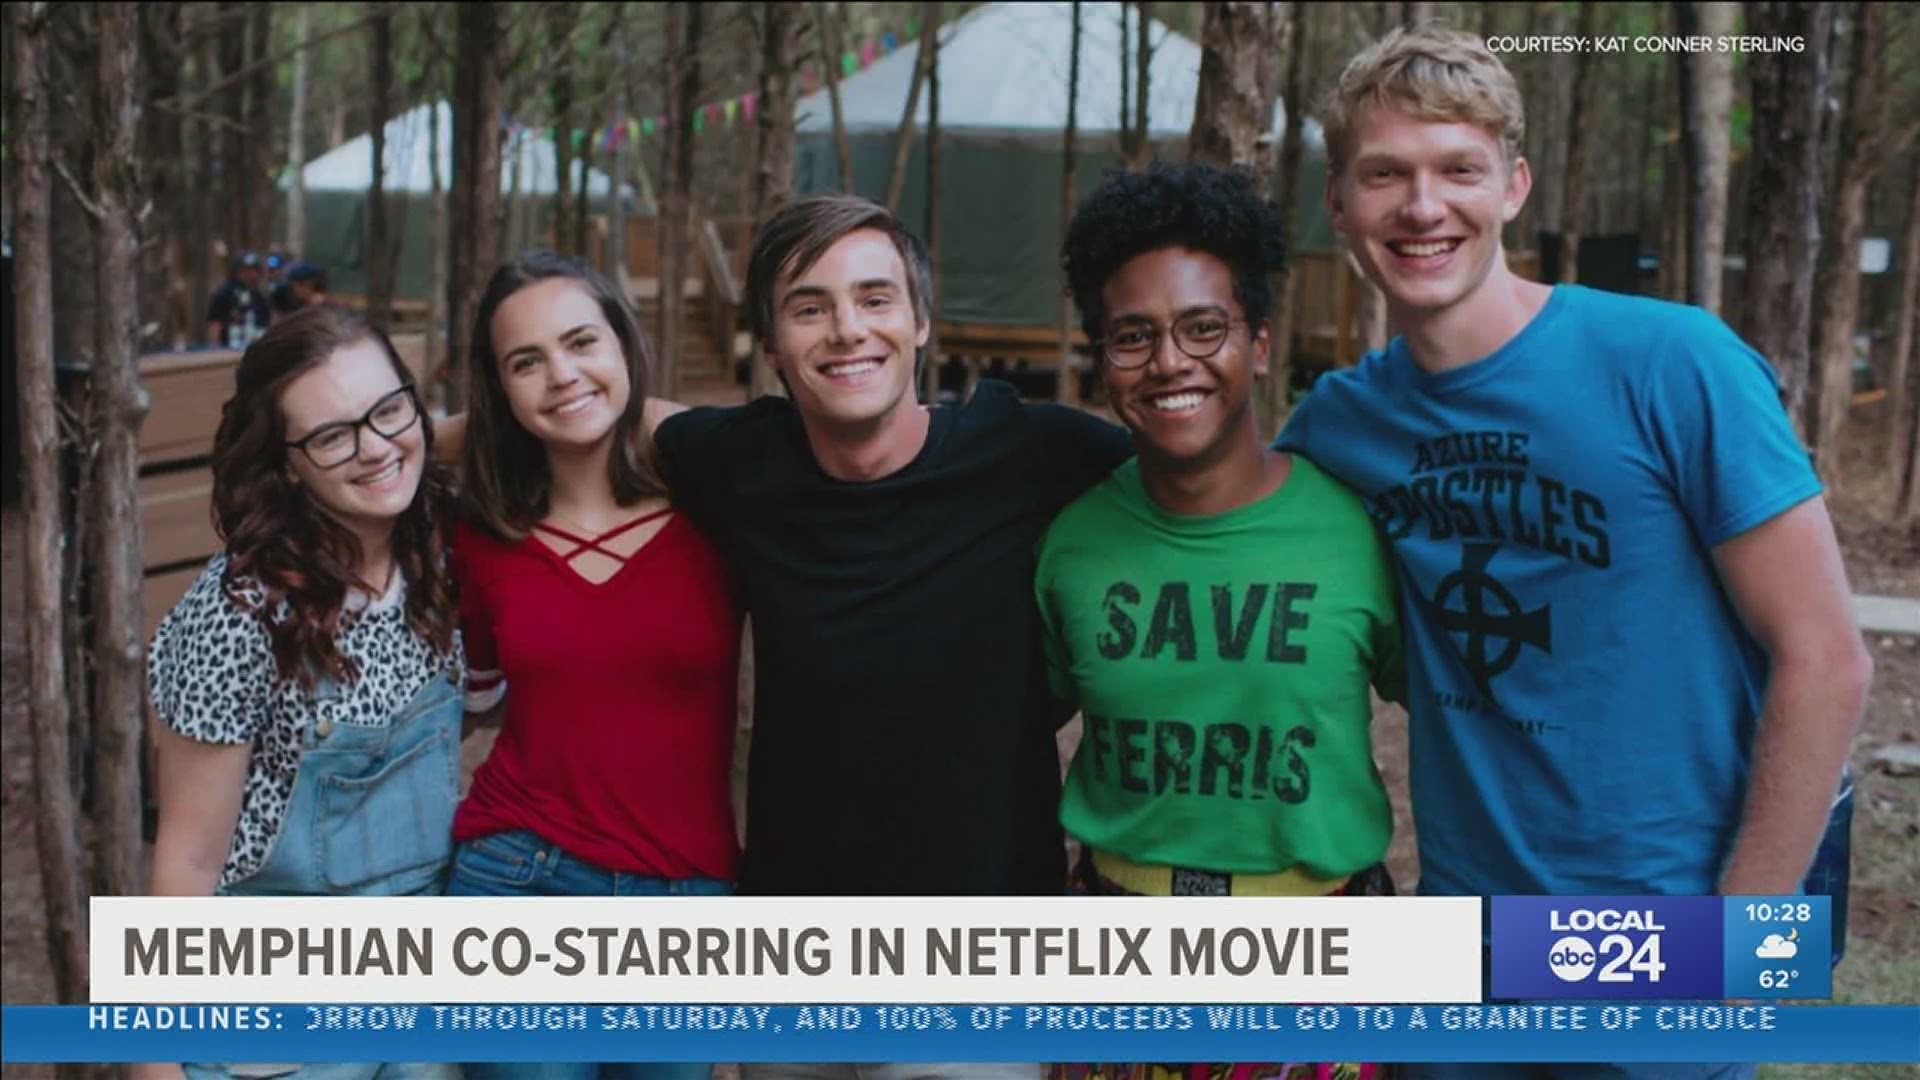 Actress Kat Conner Sterling shares details about her newest film, "A Week Away," premiering Friday on Netflix.